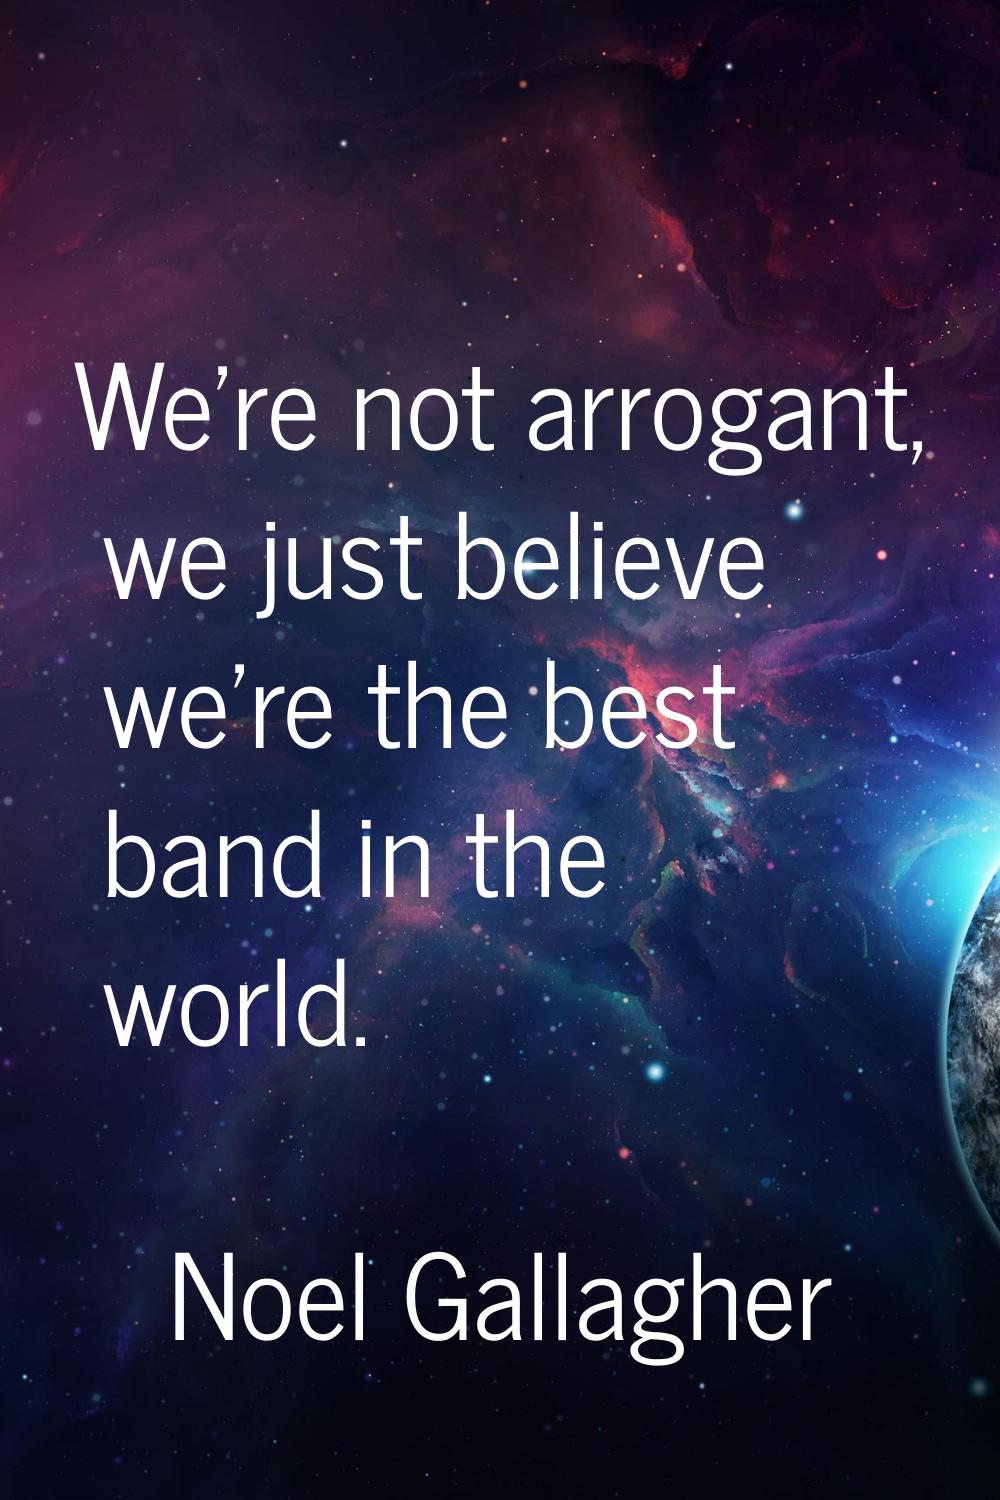 We're not arrogant, we just believe we're the best band in the world.